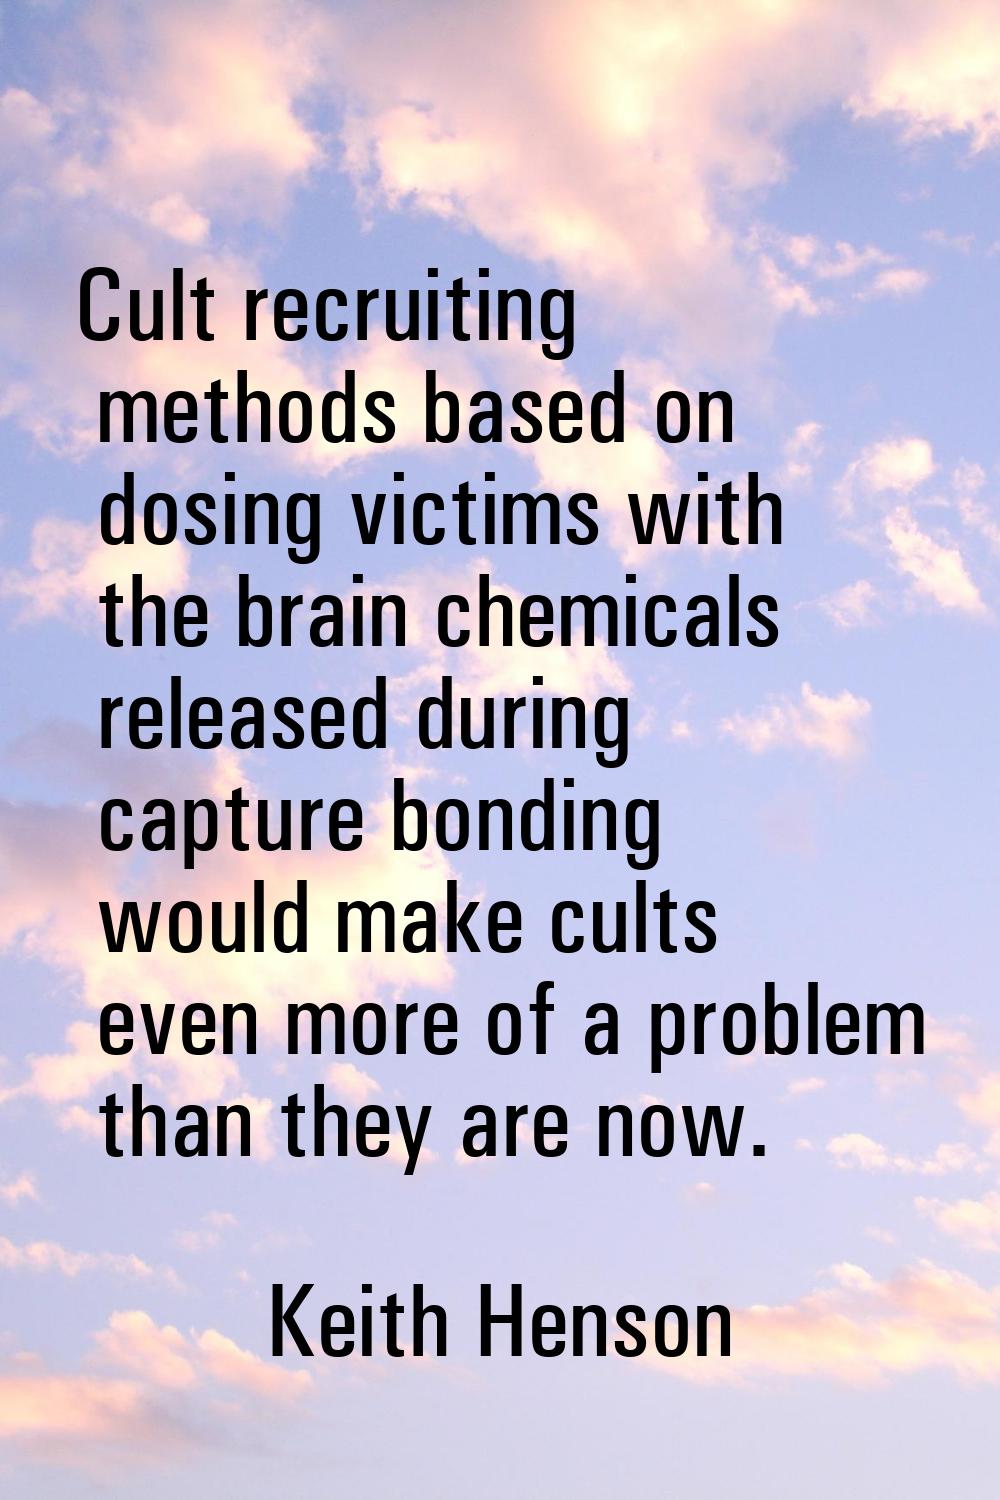 Cult recruiting methods based on dosing victims with the brain chemicals released during capture bo